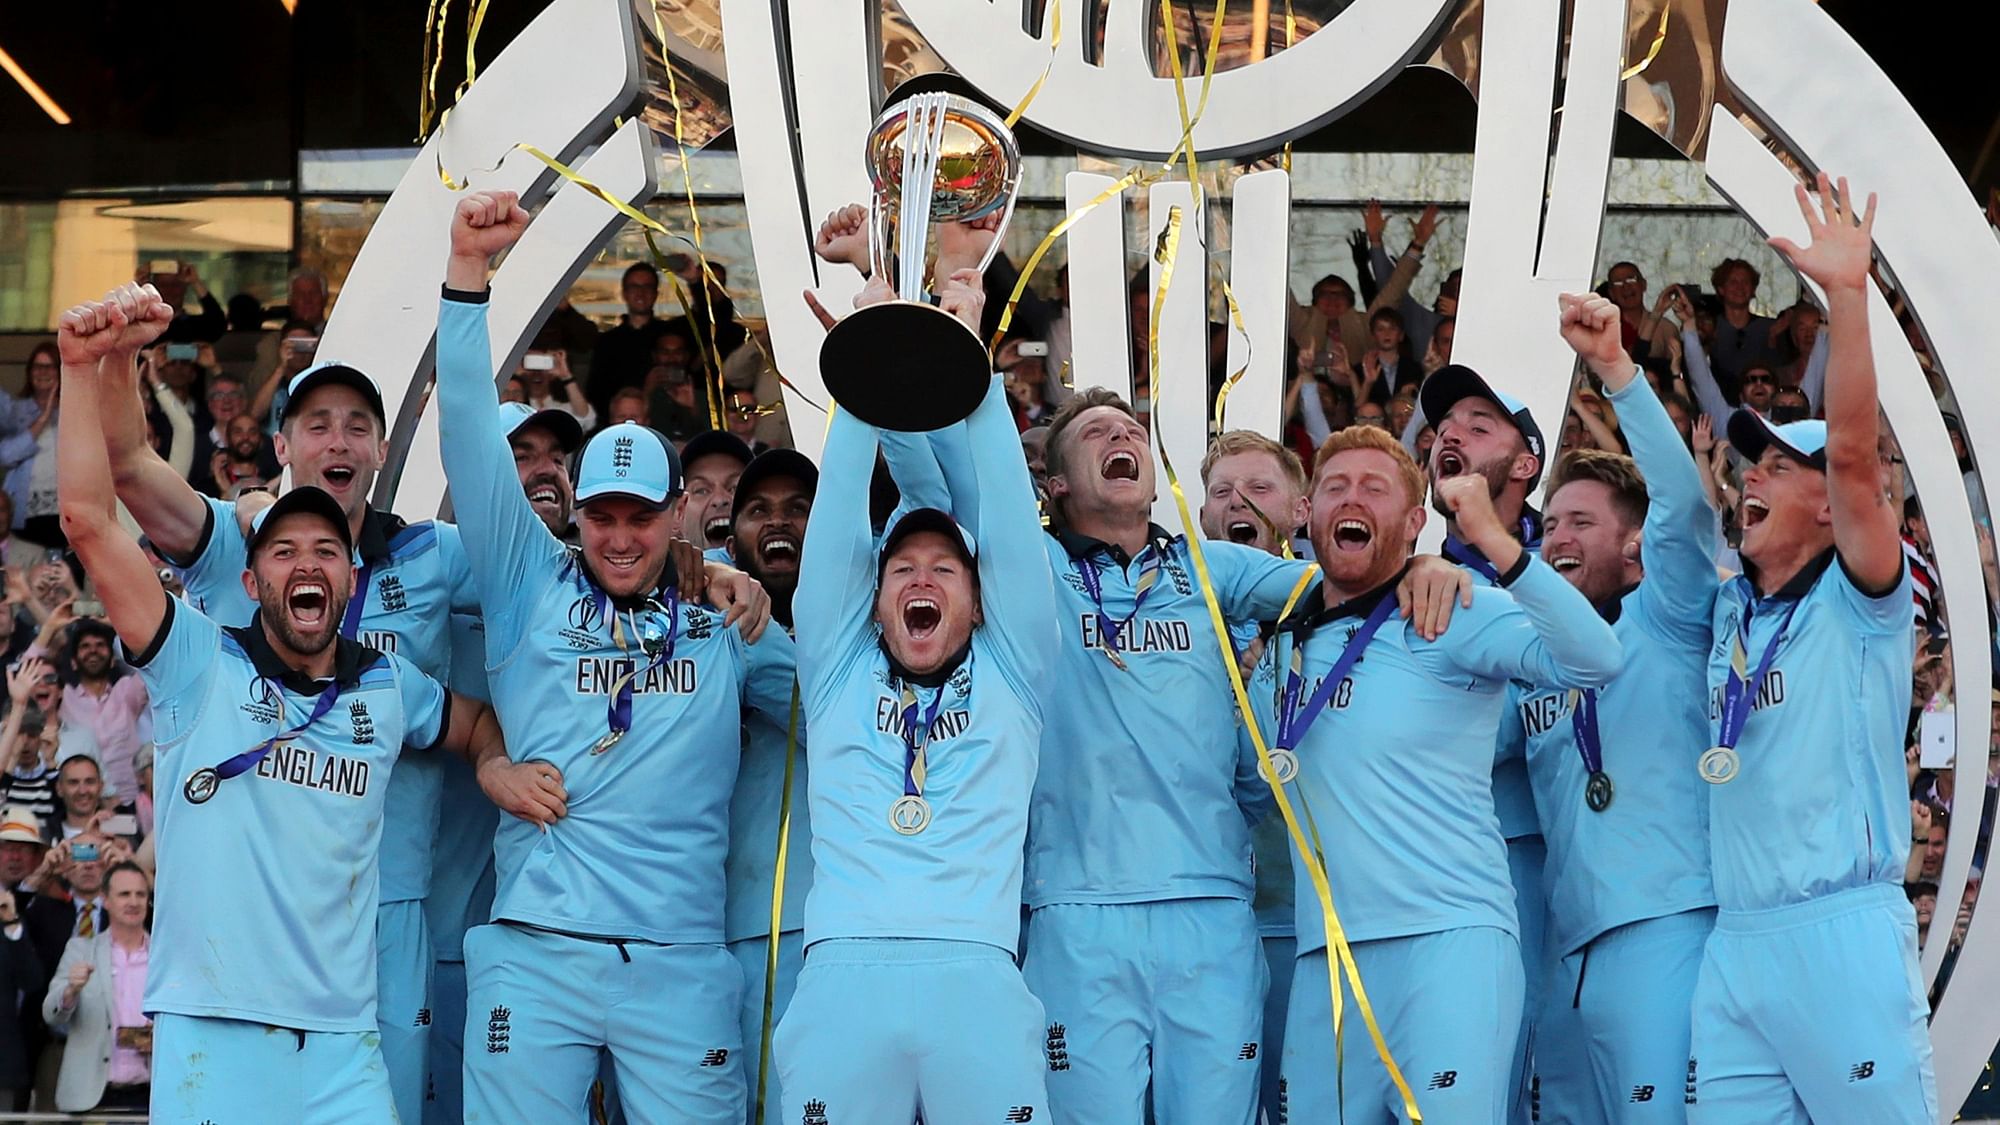 England beat New Zealand in the final of ICC World Cup 2019 to win their maiden World Cup.